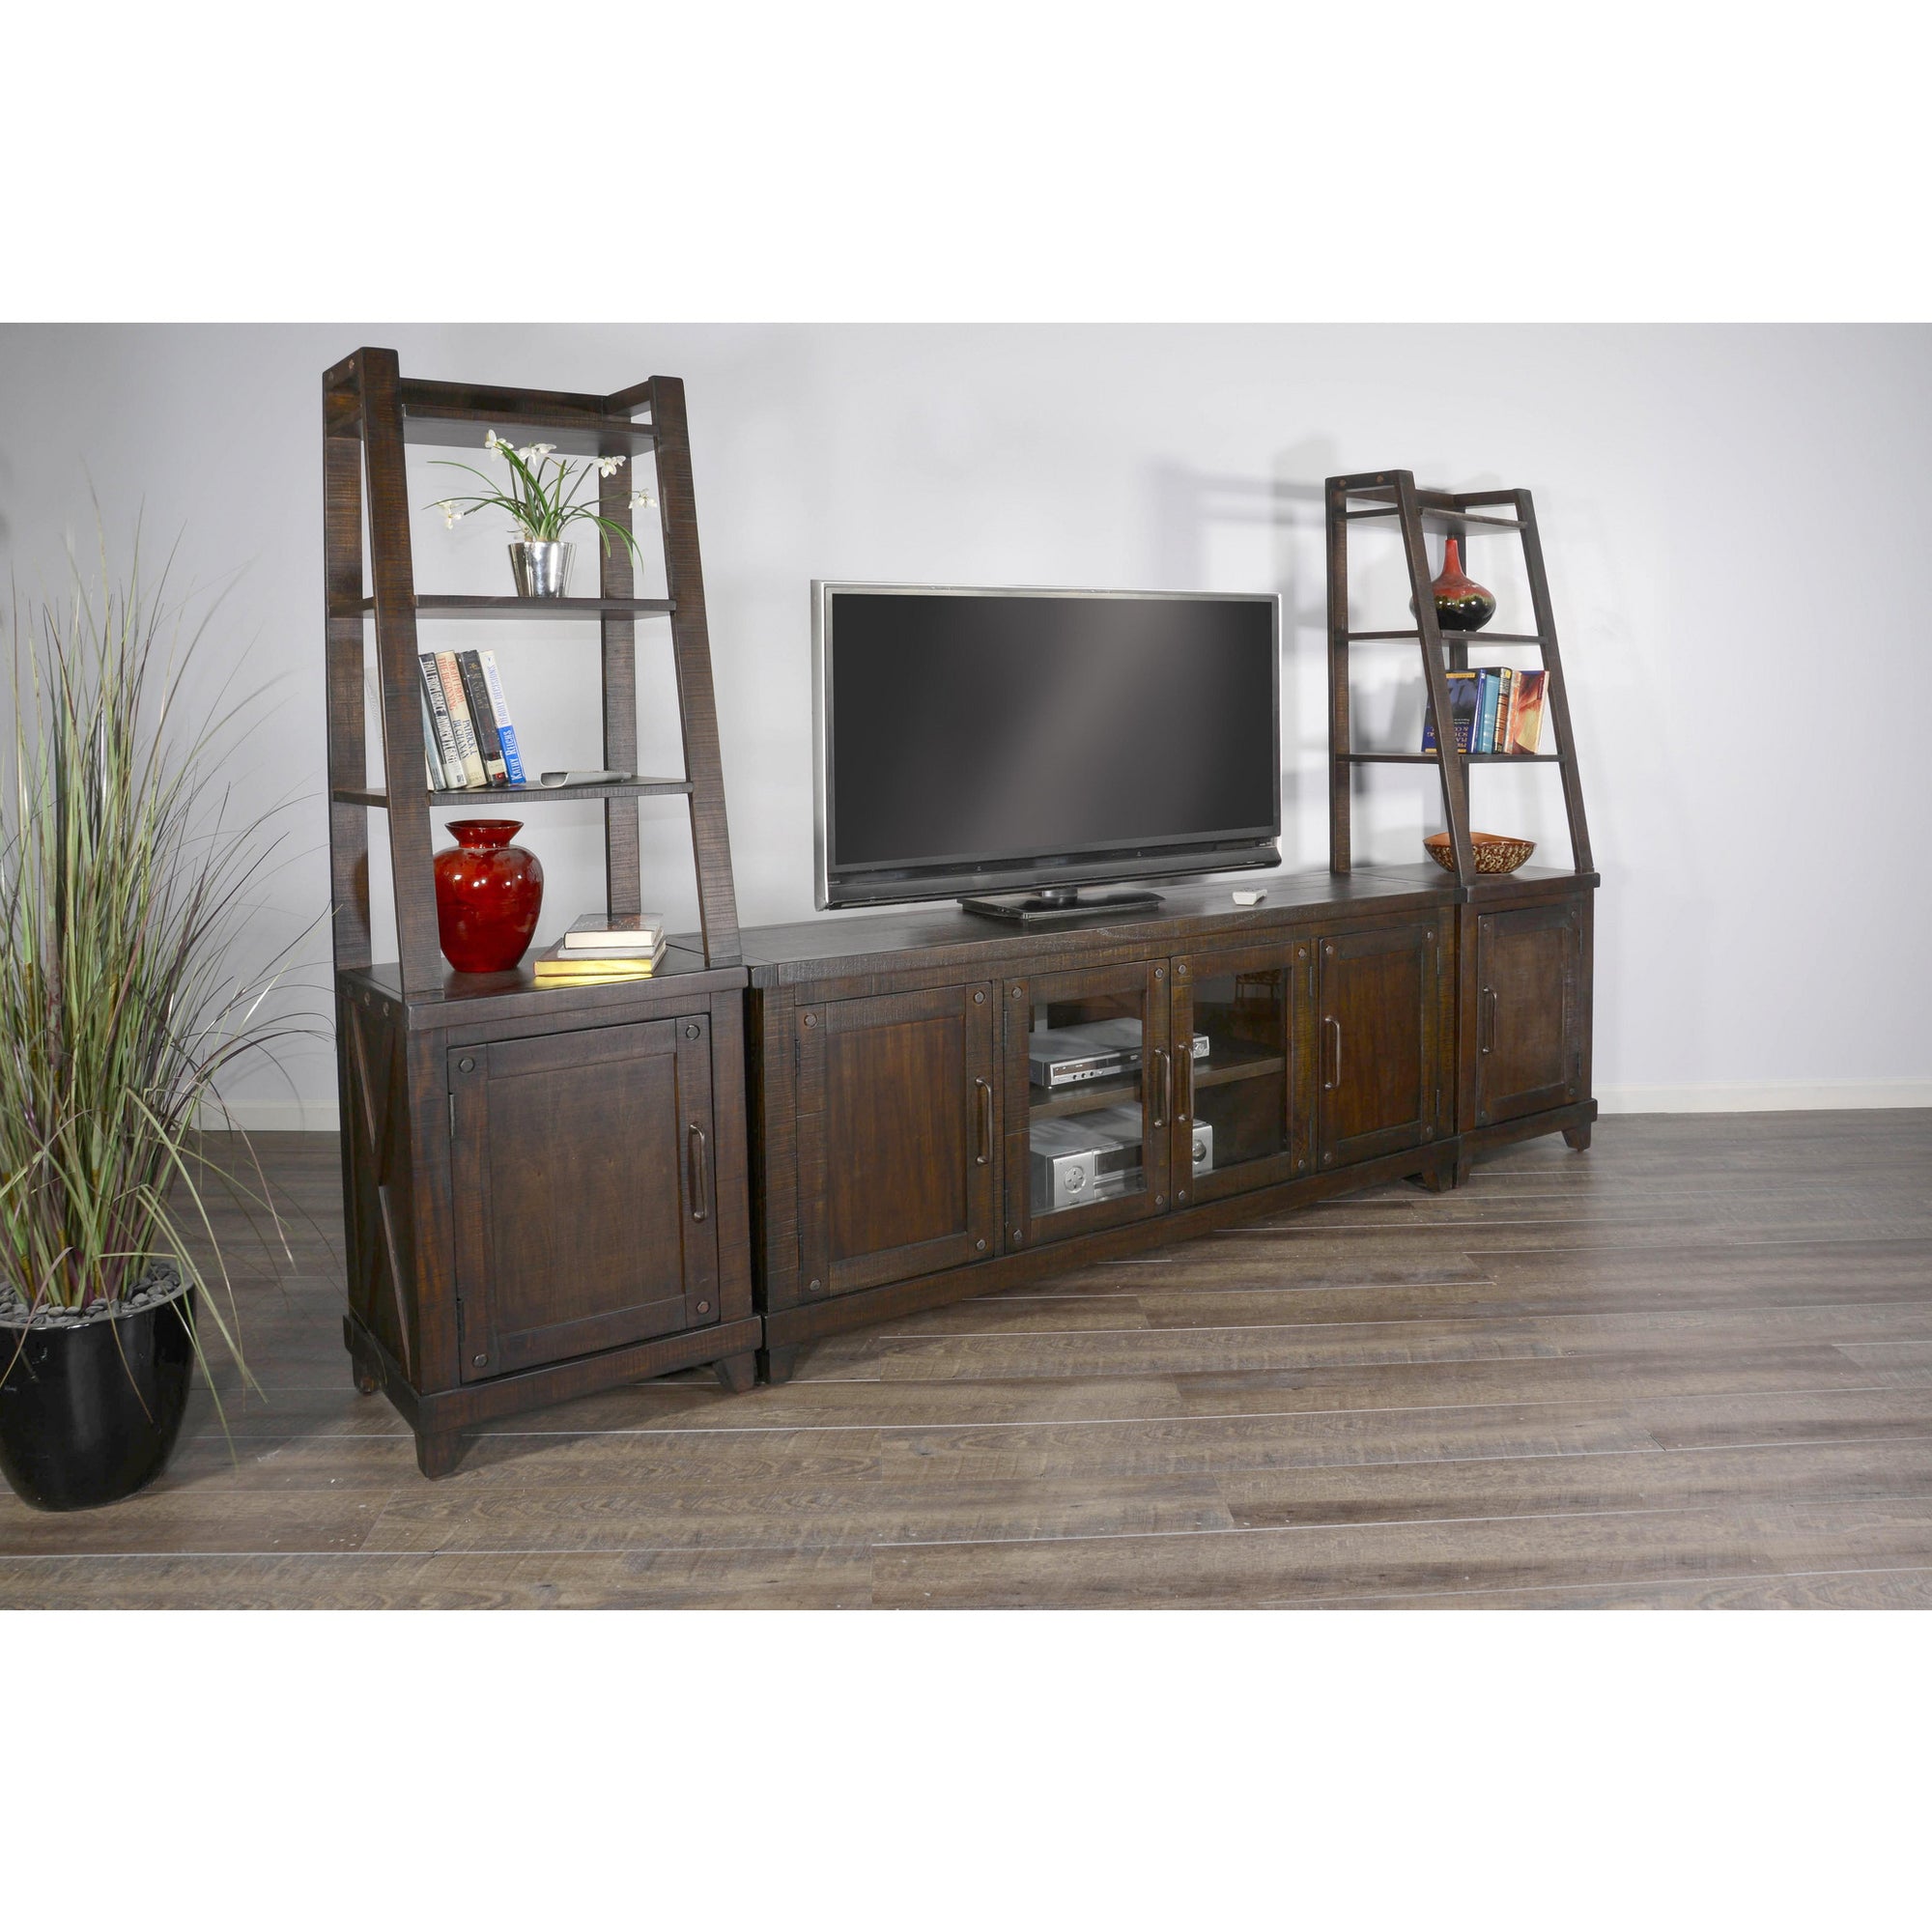 Vivian 74 inch Media Console with Piers